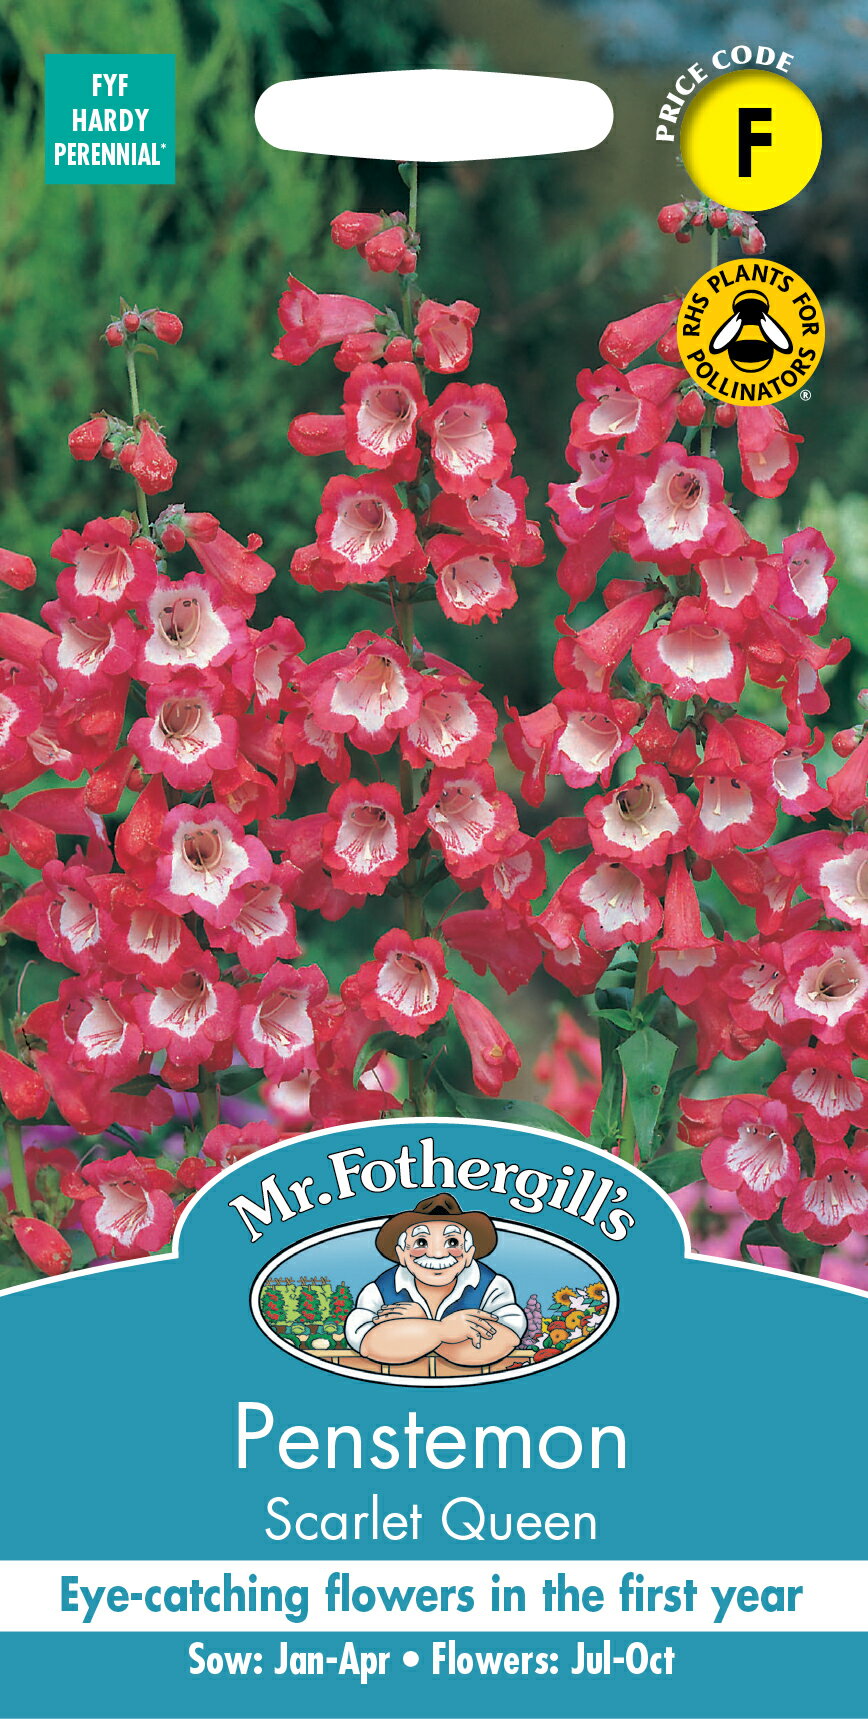 Mr.Fothergill's Seeds Penstemon Scarlet Queen ペンステモン スカーレット クイーン ミスター・フォザーギルズシード